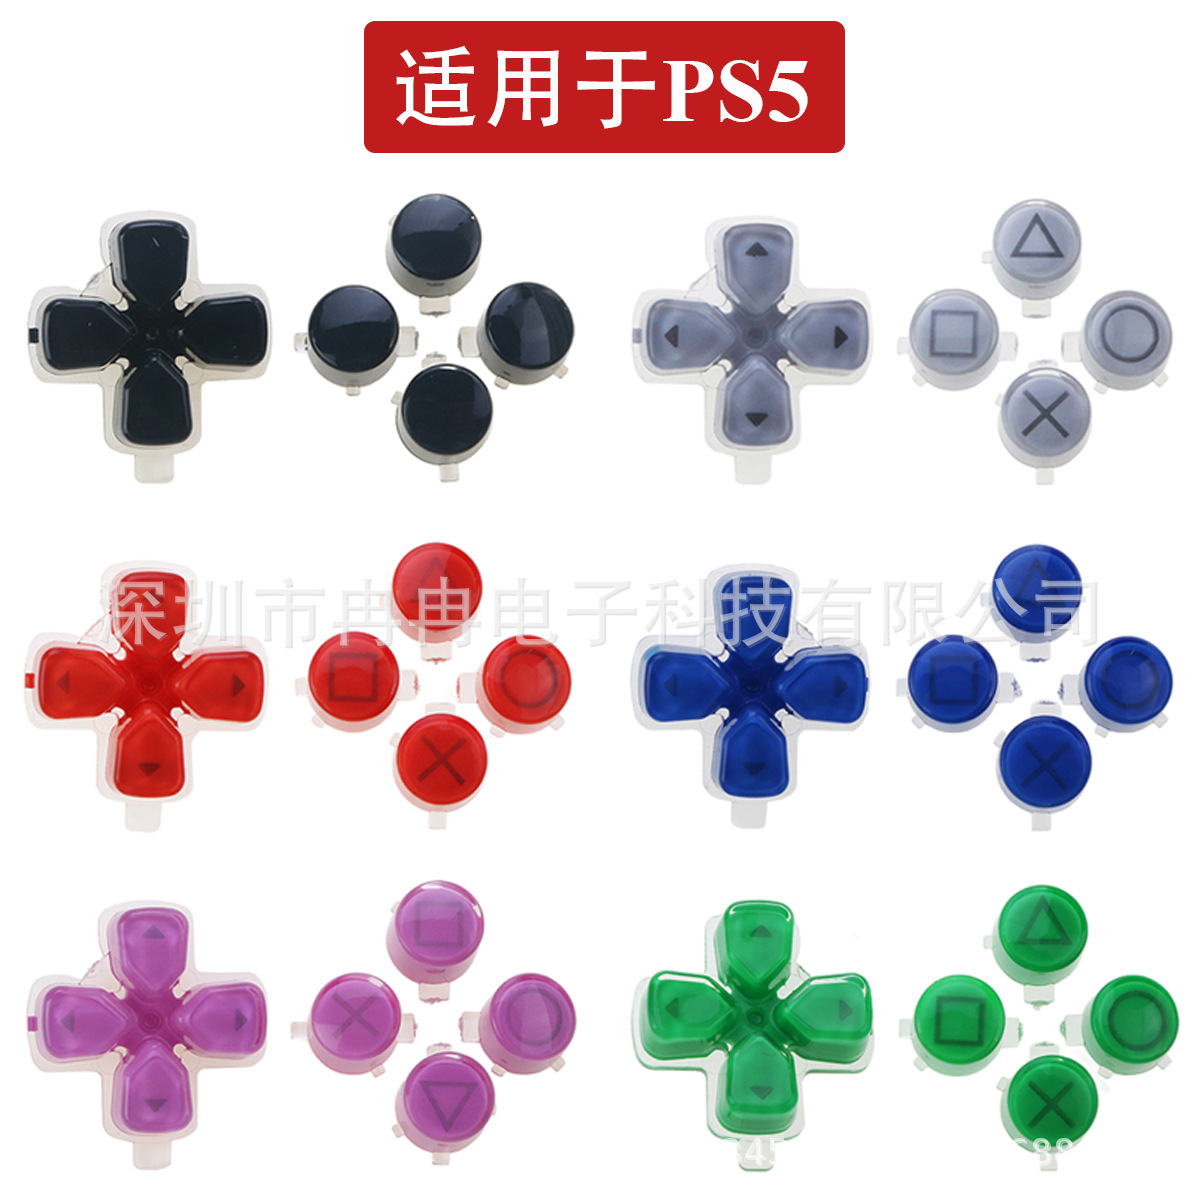 PS5 Handle Cross keys ABXY colour crystal Key DIY Left and right buttons PS5 Handle Modding